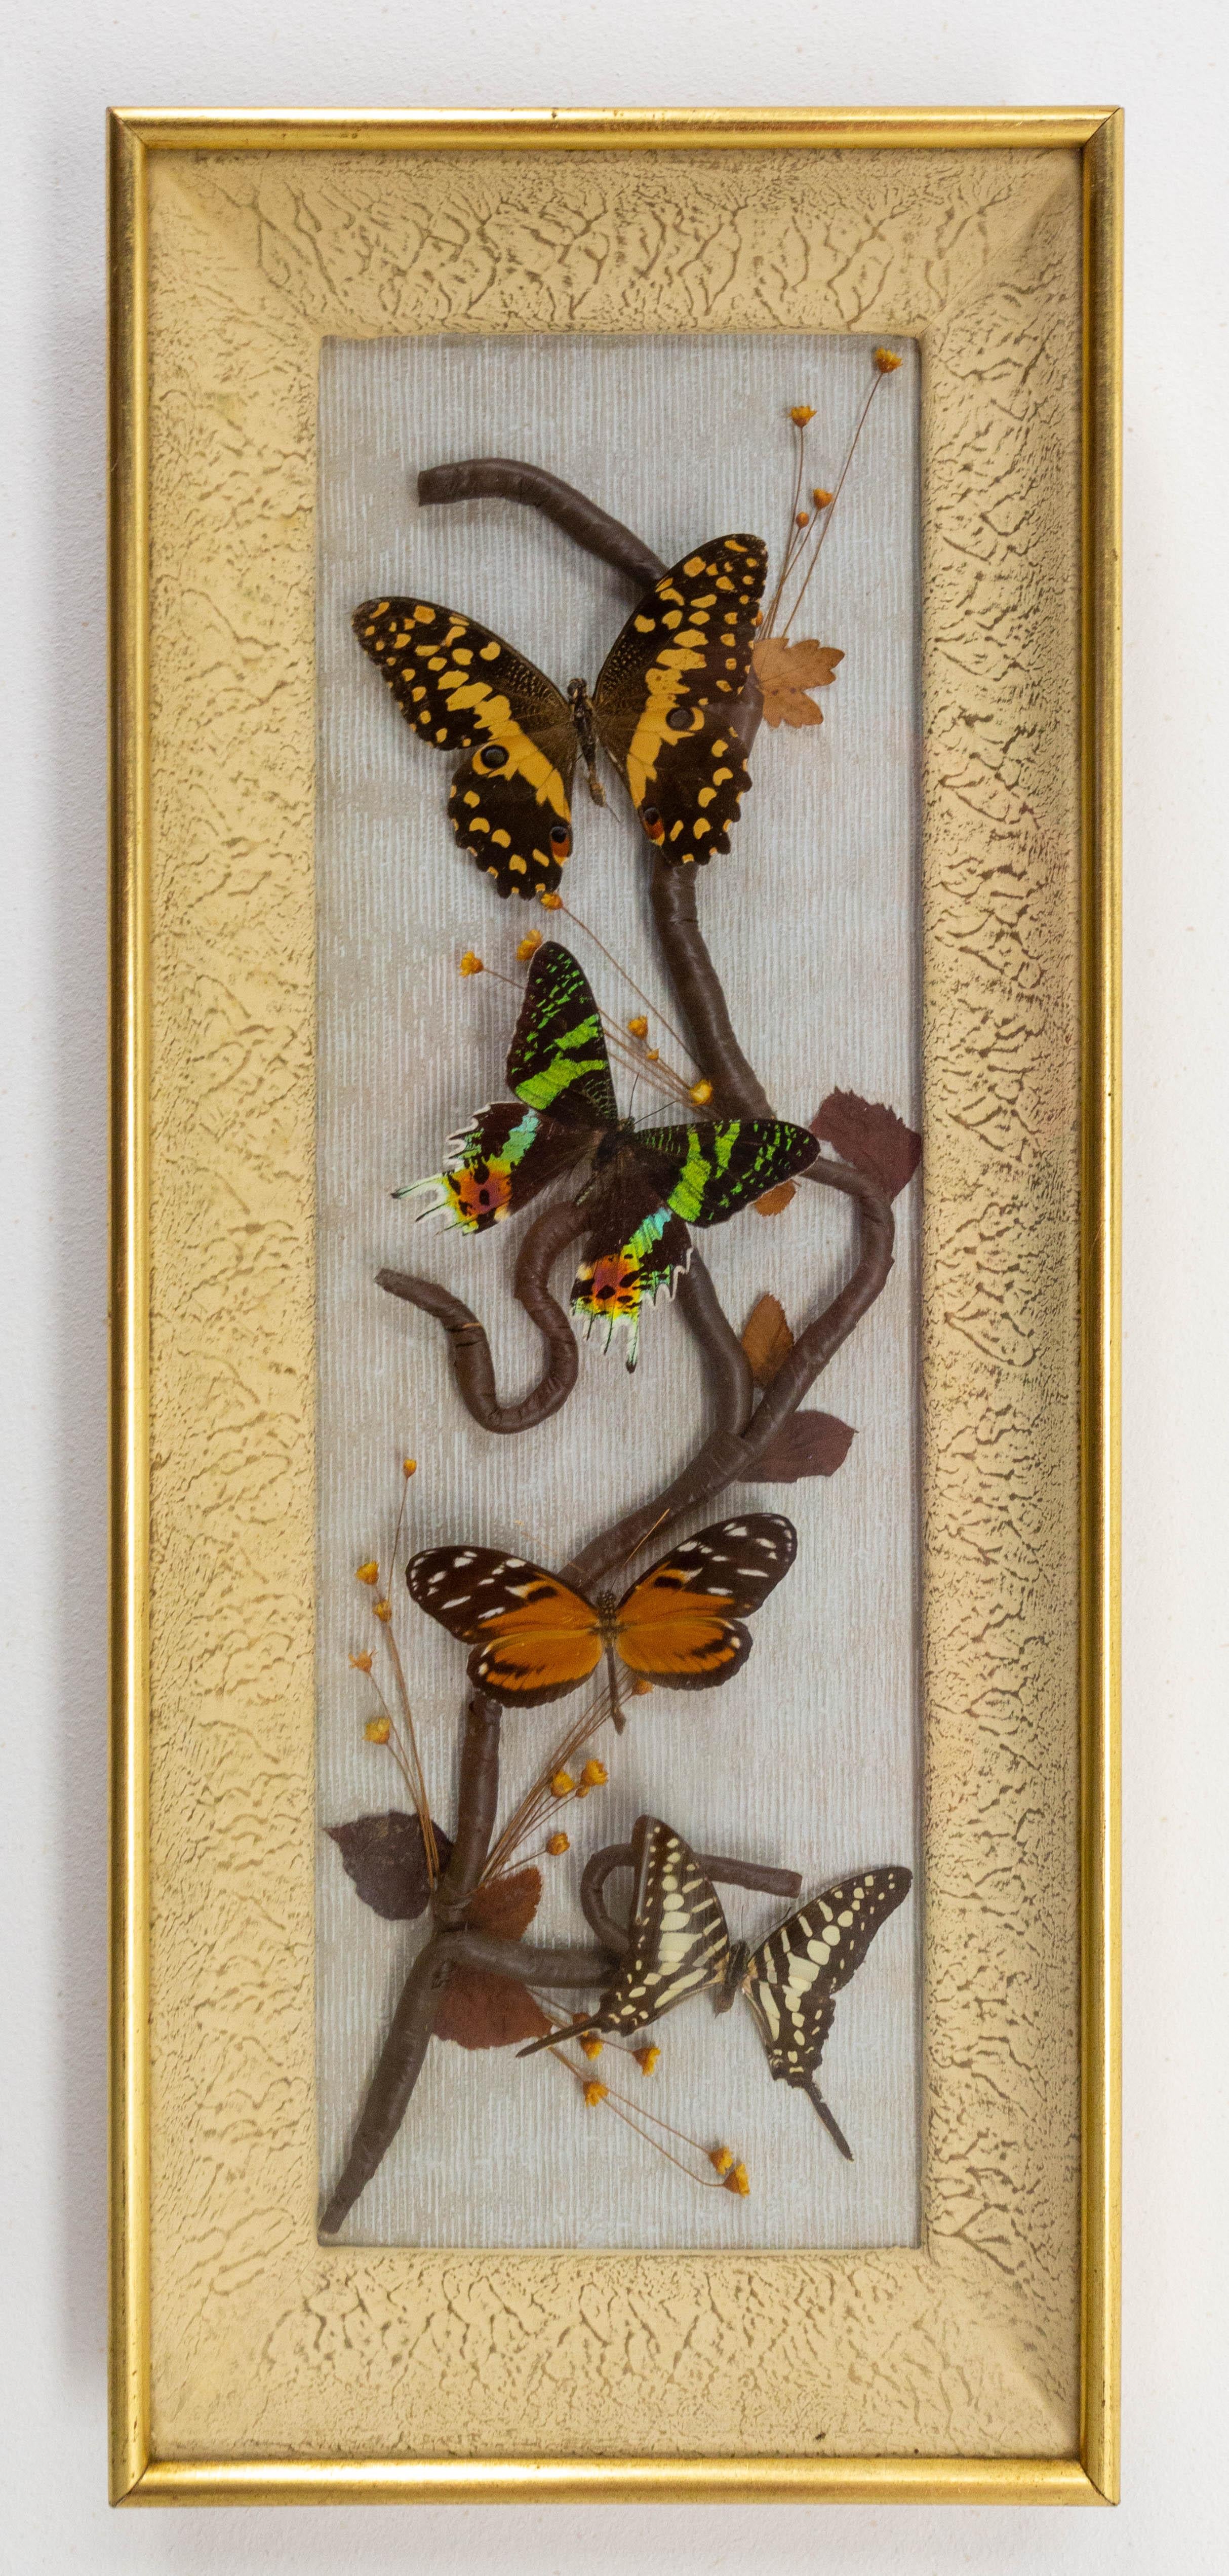 Midcentury glass box frame with butterflies, French, circa 1950.
Good vintage condition

Shipping:
4/22 / 52 cm 1.4 kg.